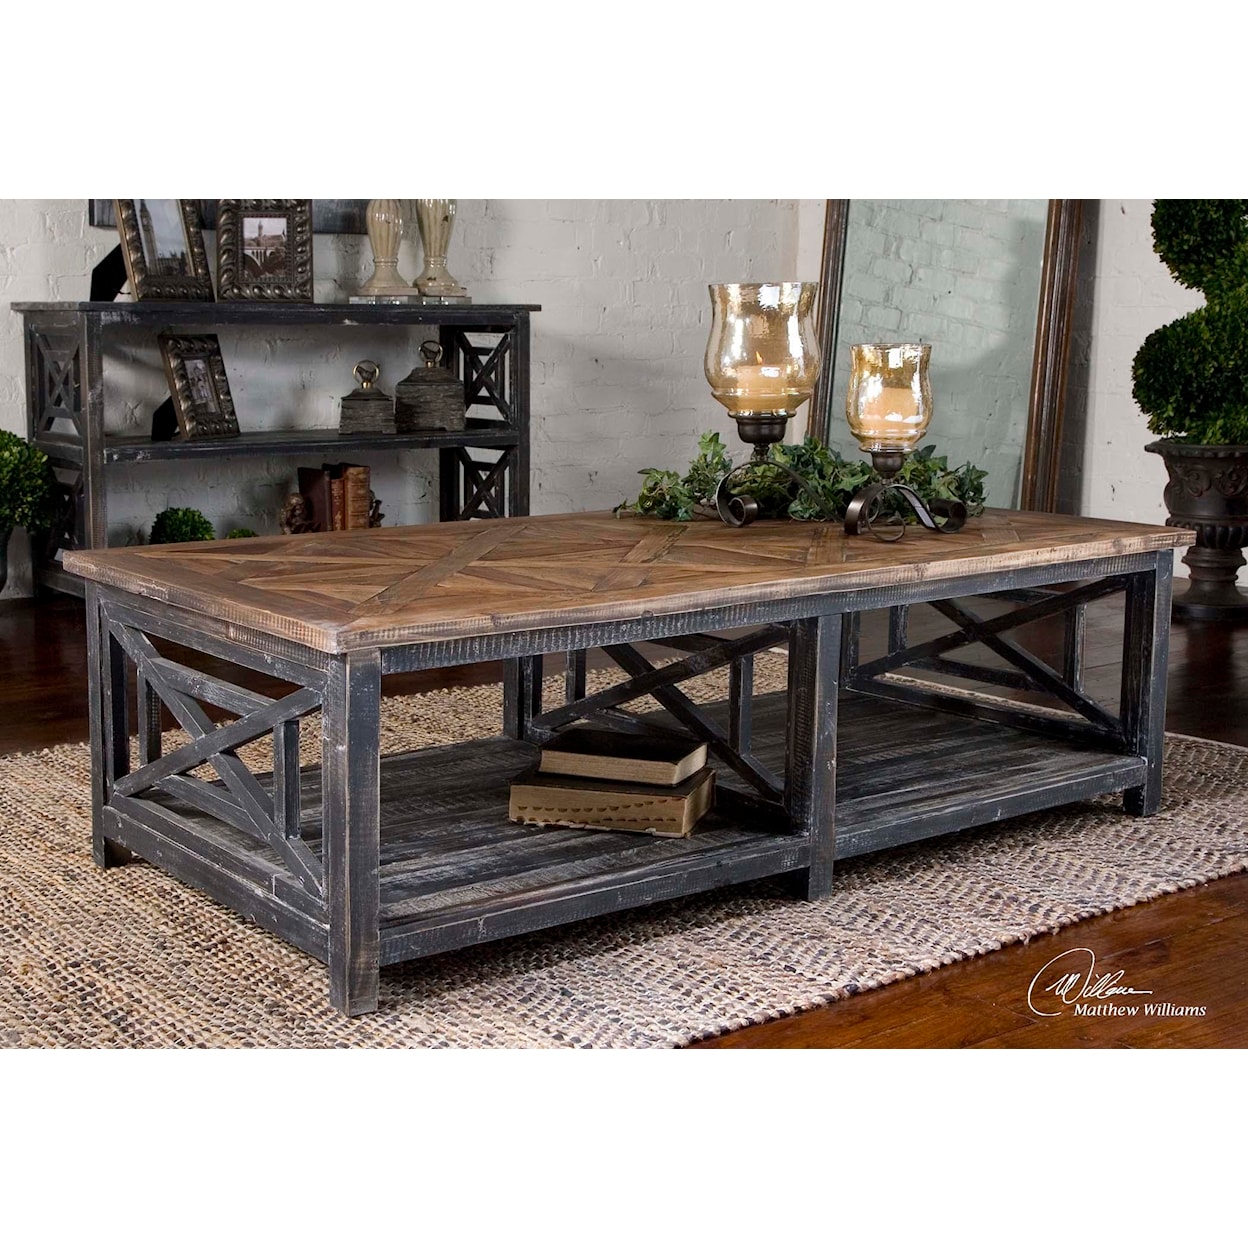 Uttermost Accent Furniture - Occasional Tables Spiro Cocktail Table